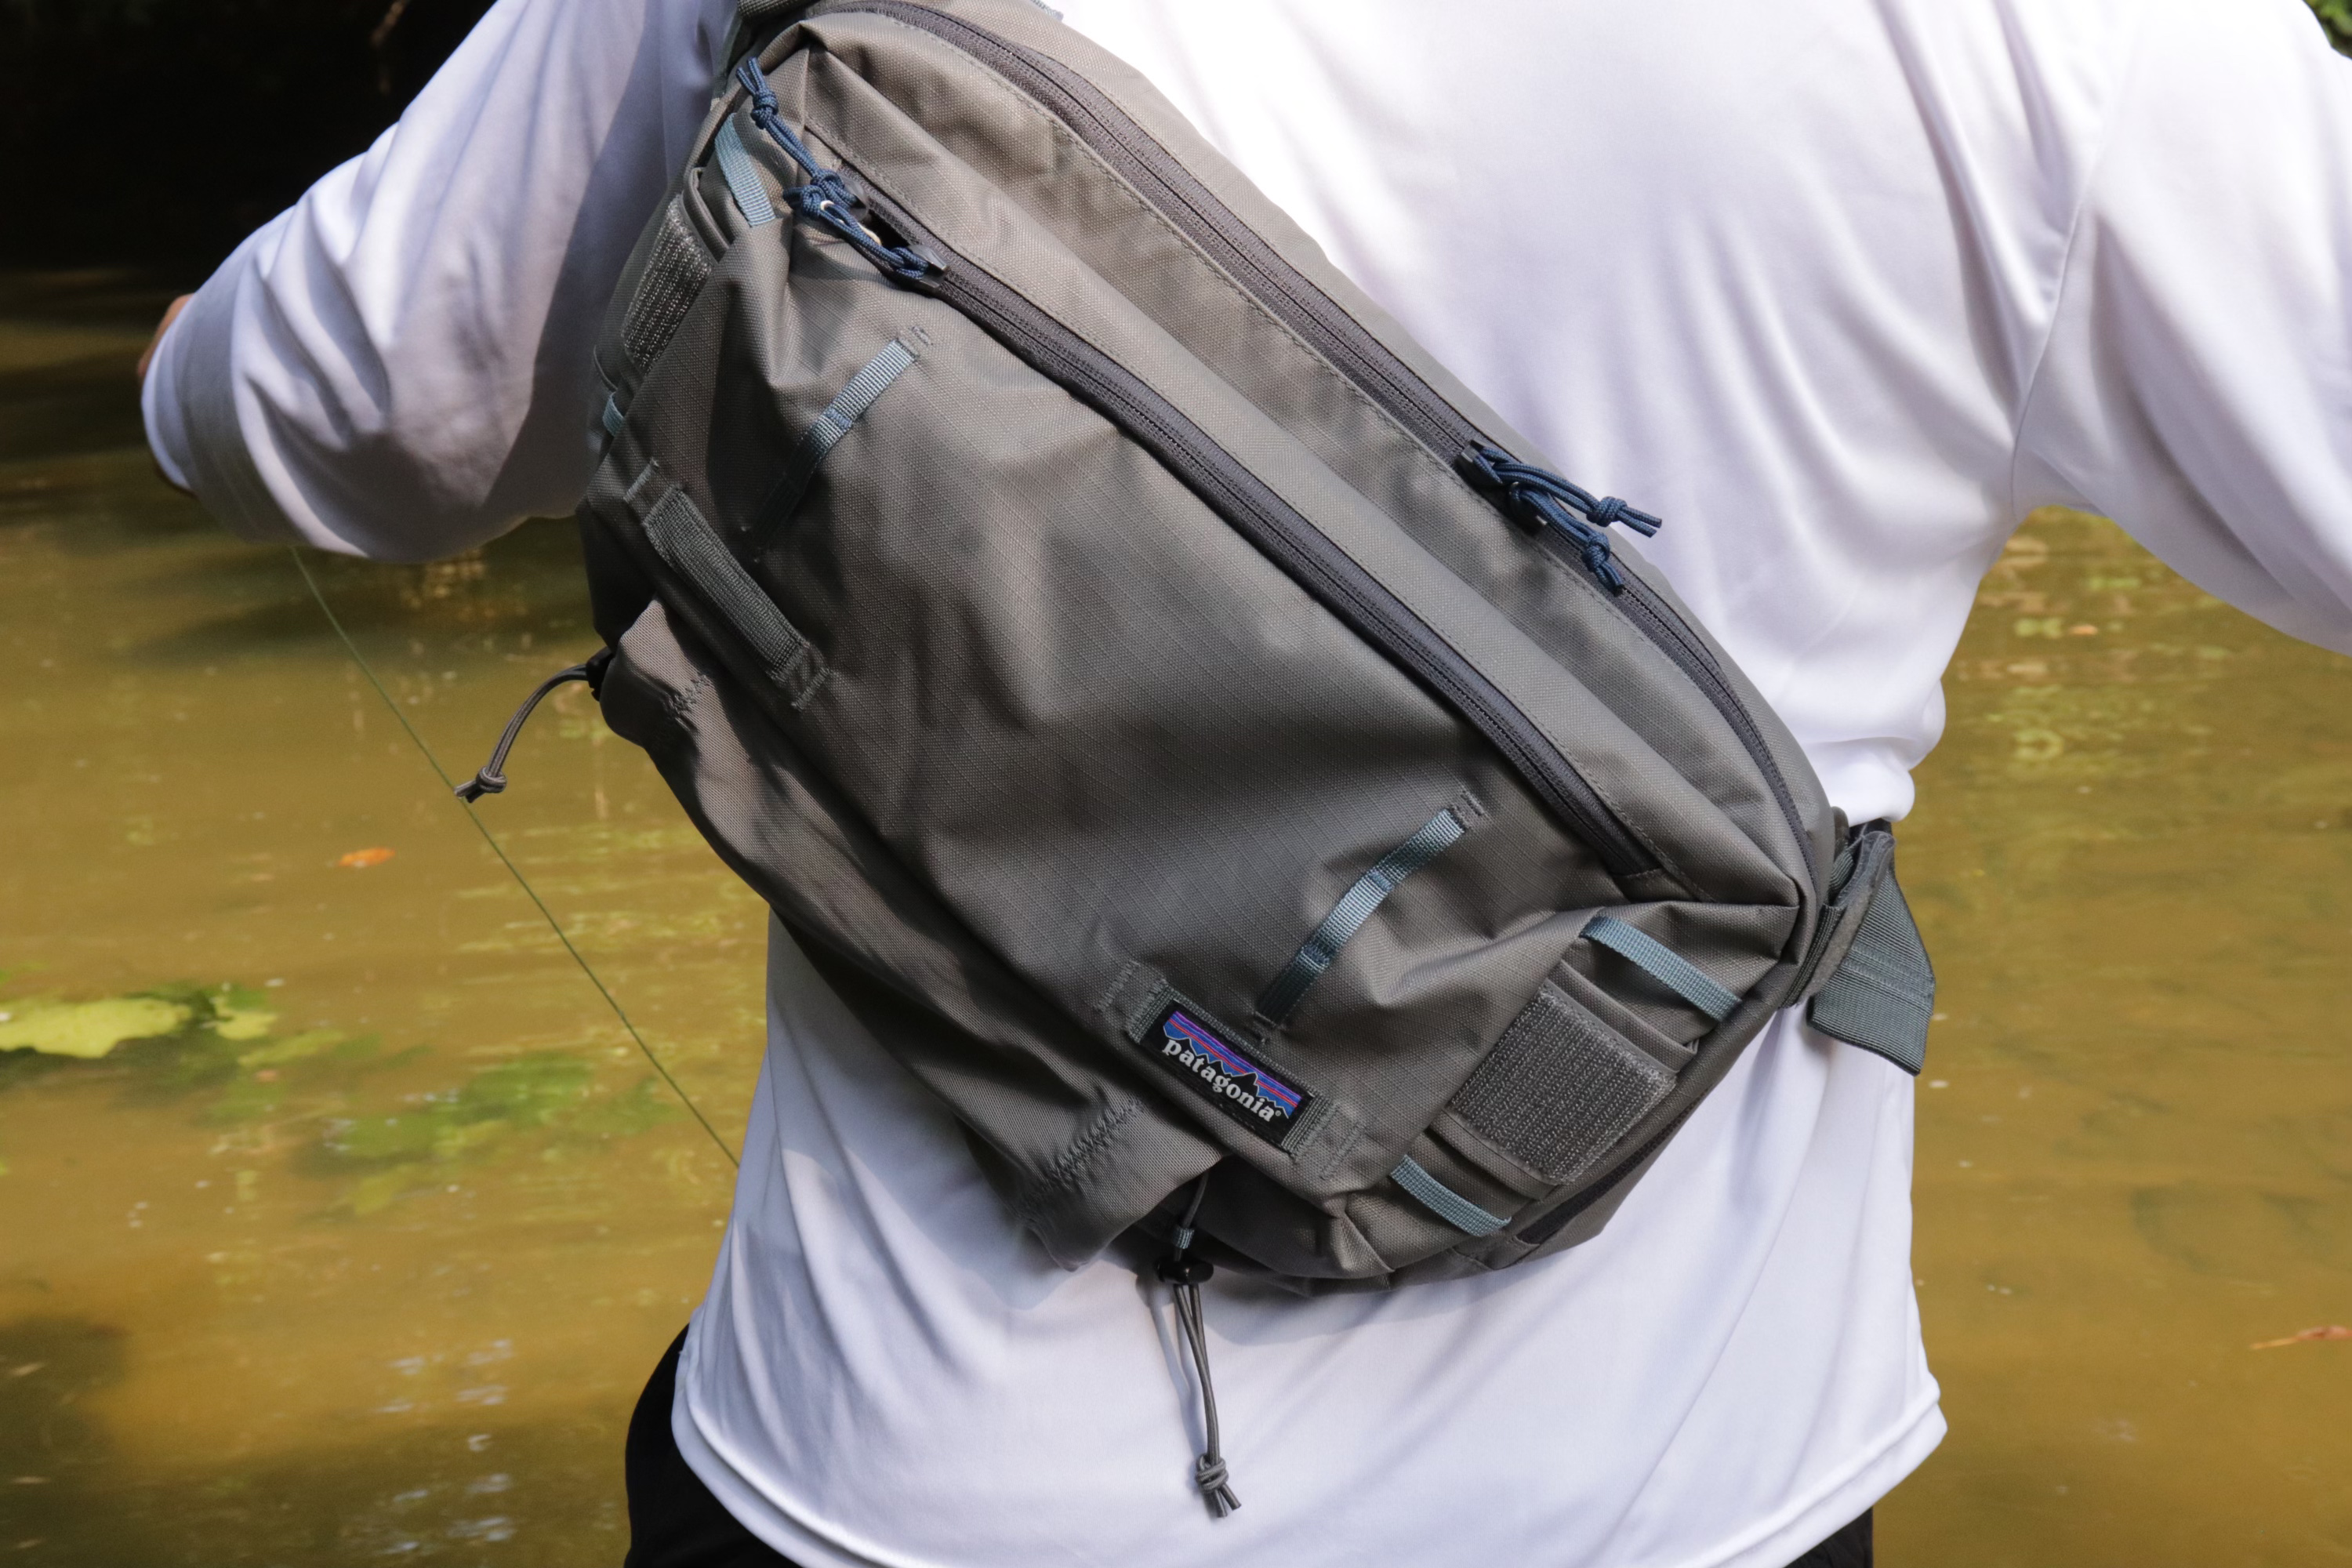 Patagonia's Stealth Sling on an angler mid-cast